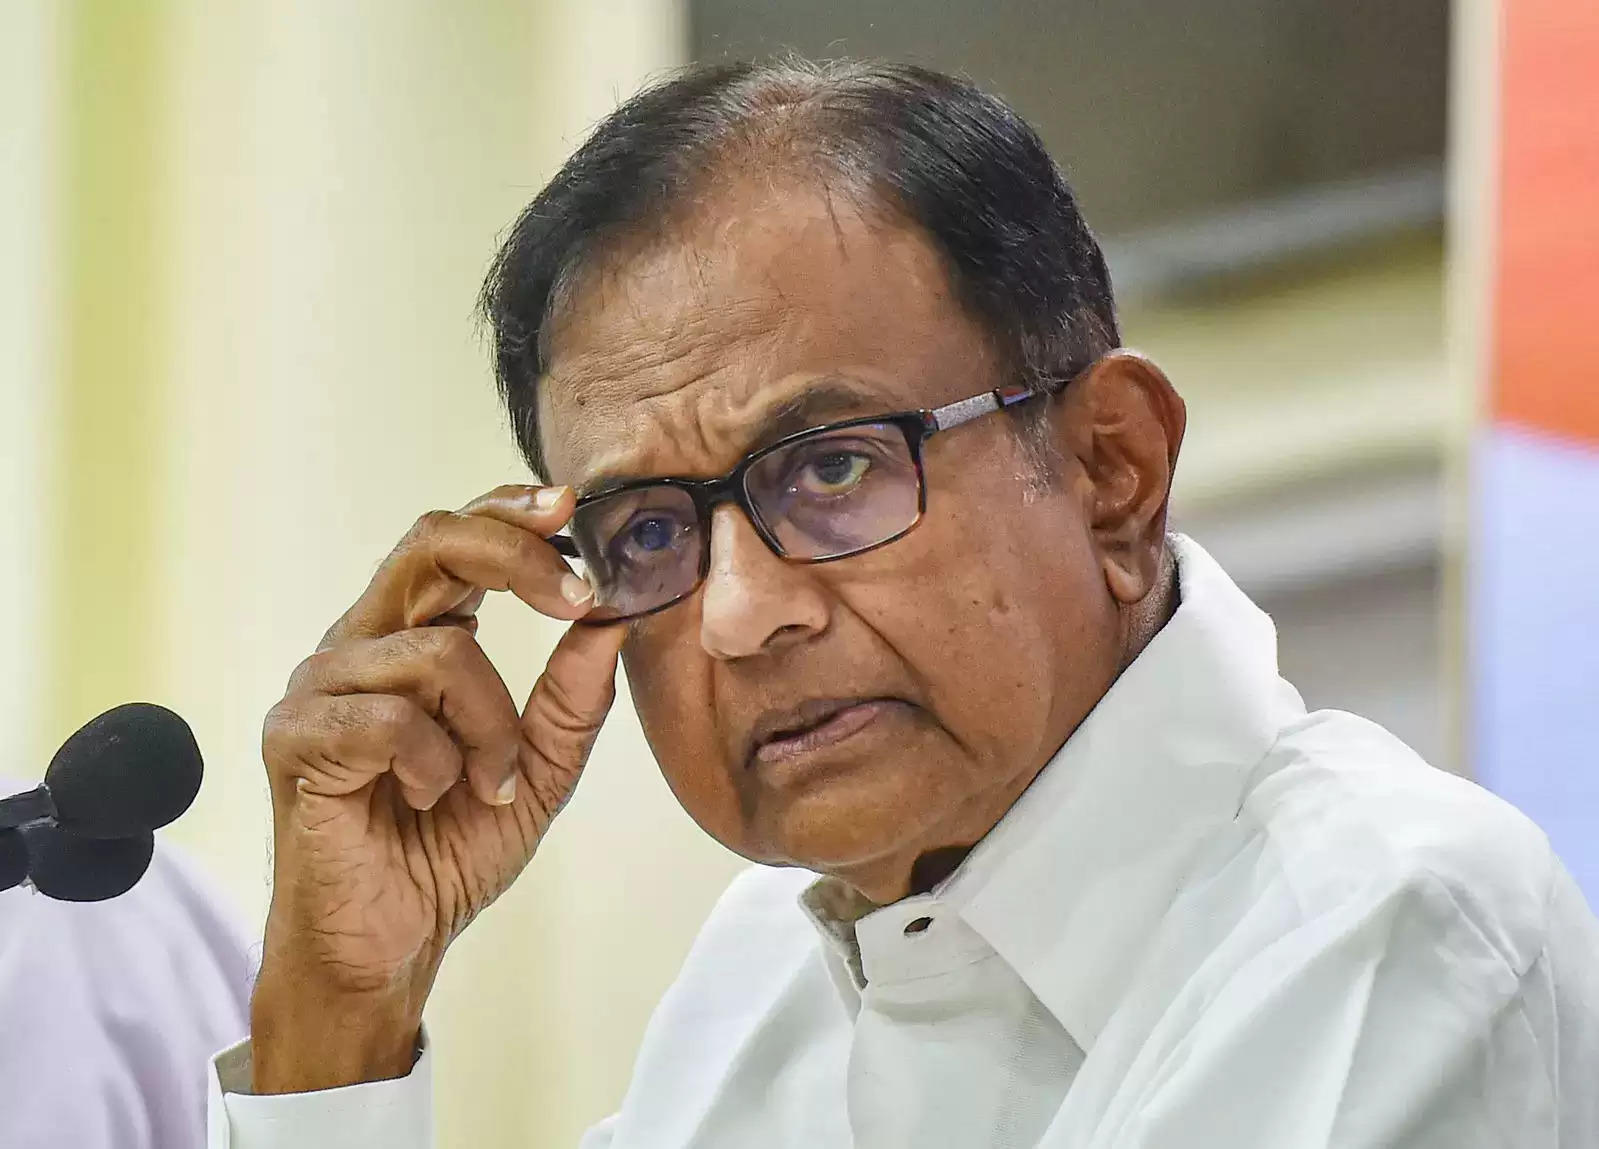 Chidambaram said Rahul Gandhi will always have a prominent place in the party, whether he is the president or not